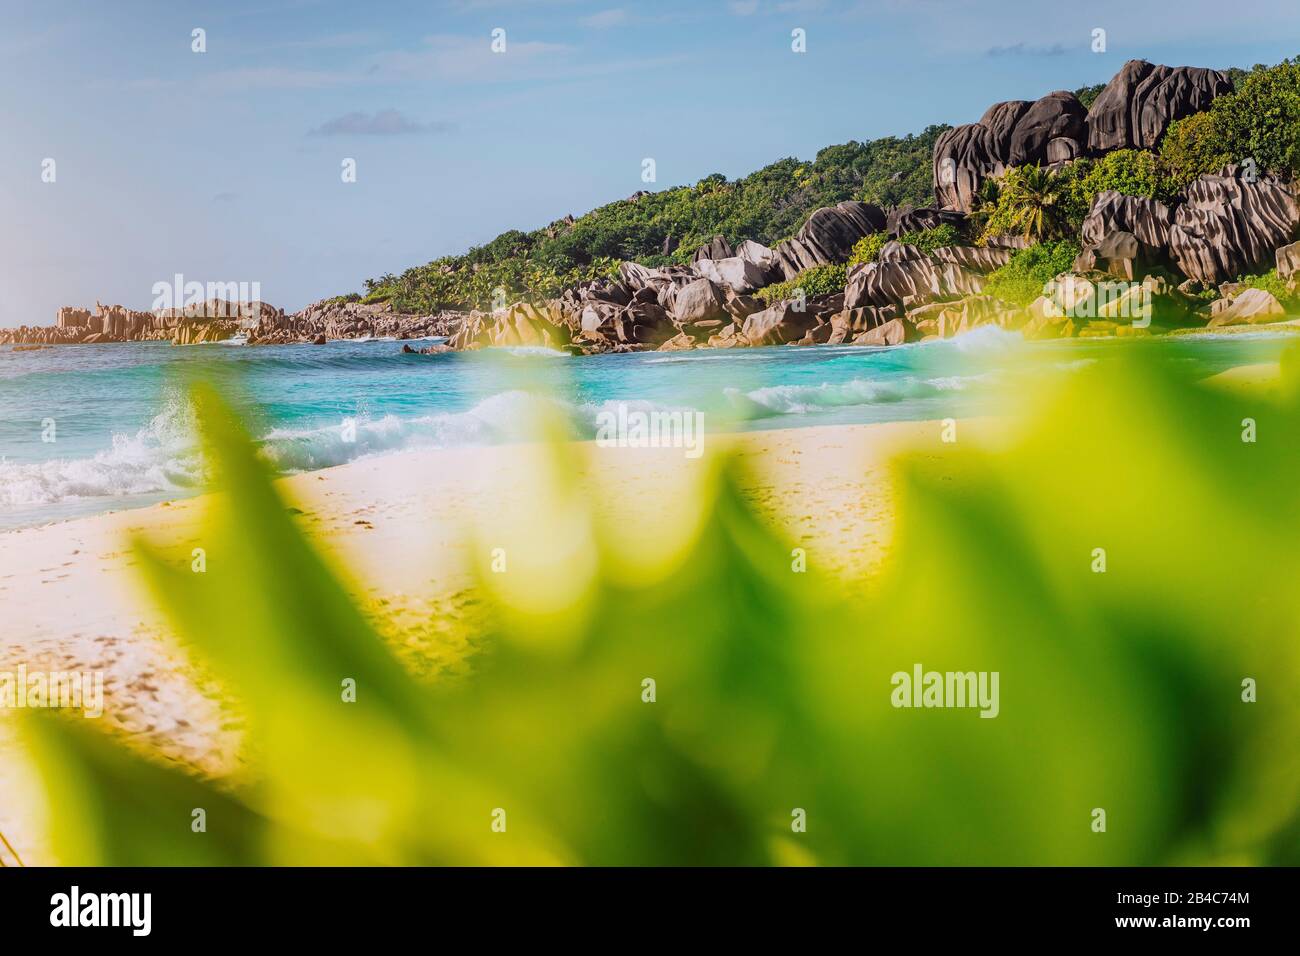 Grand Anse, La Digue island, Seychelles. Defocused lush green vegetation in foreground and gorgeous white sand paradise beach with turquoise waves and unique granite rock formation in background. Stock Photo